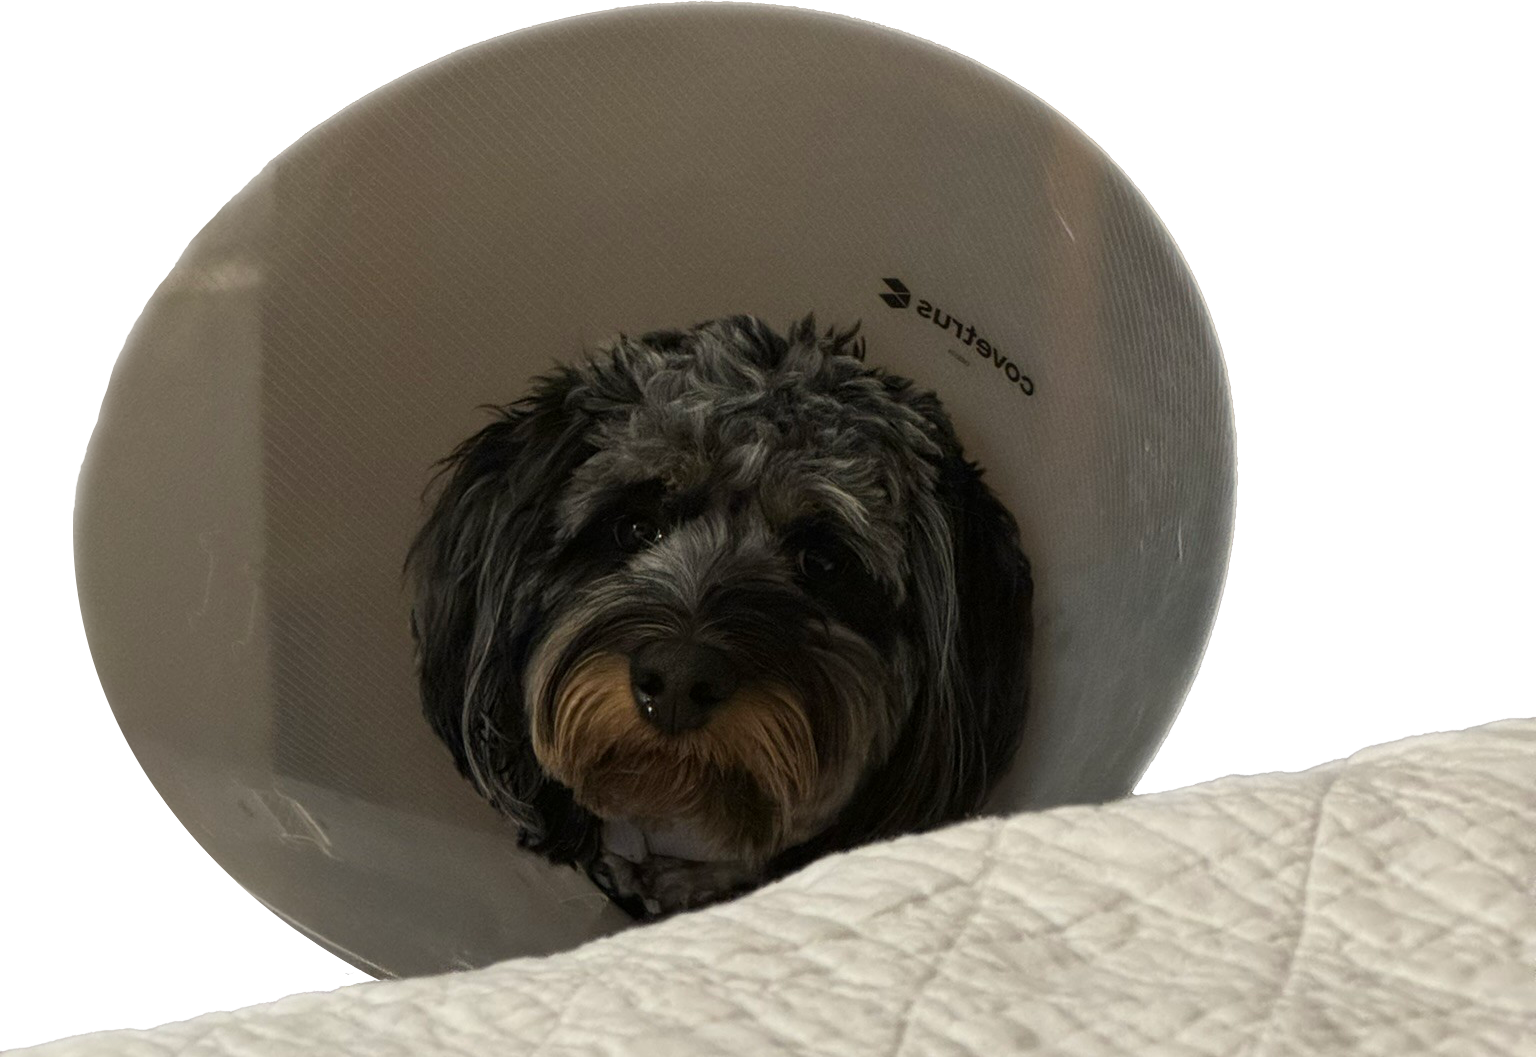 A picture of a puppy wearing a cone looking at the camera with her head tilted.